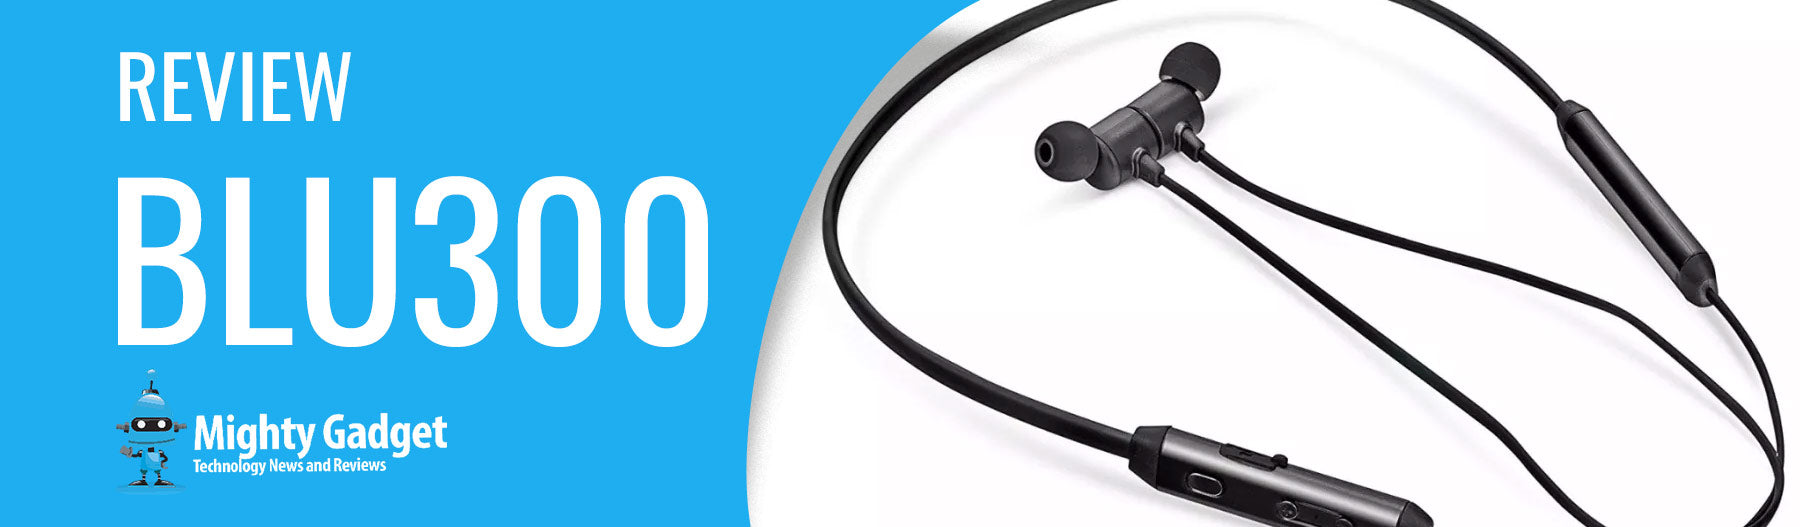 BLU-300 Bluetooth Earbuds Review by Mighty Gadget